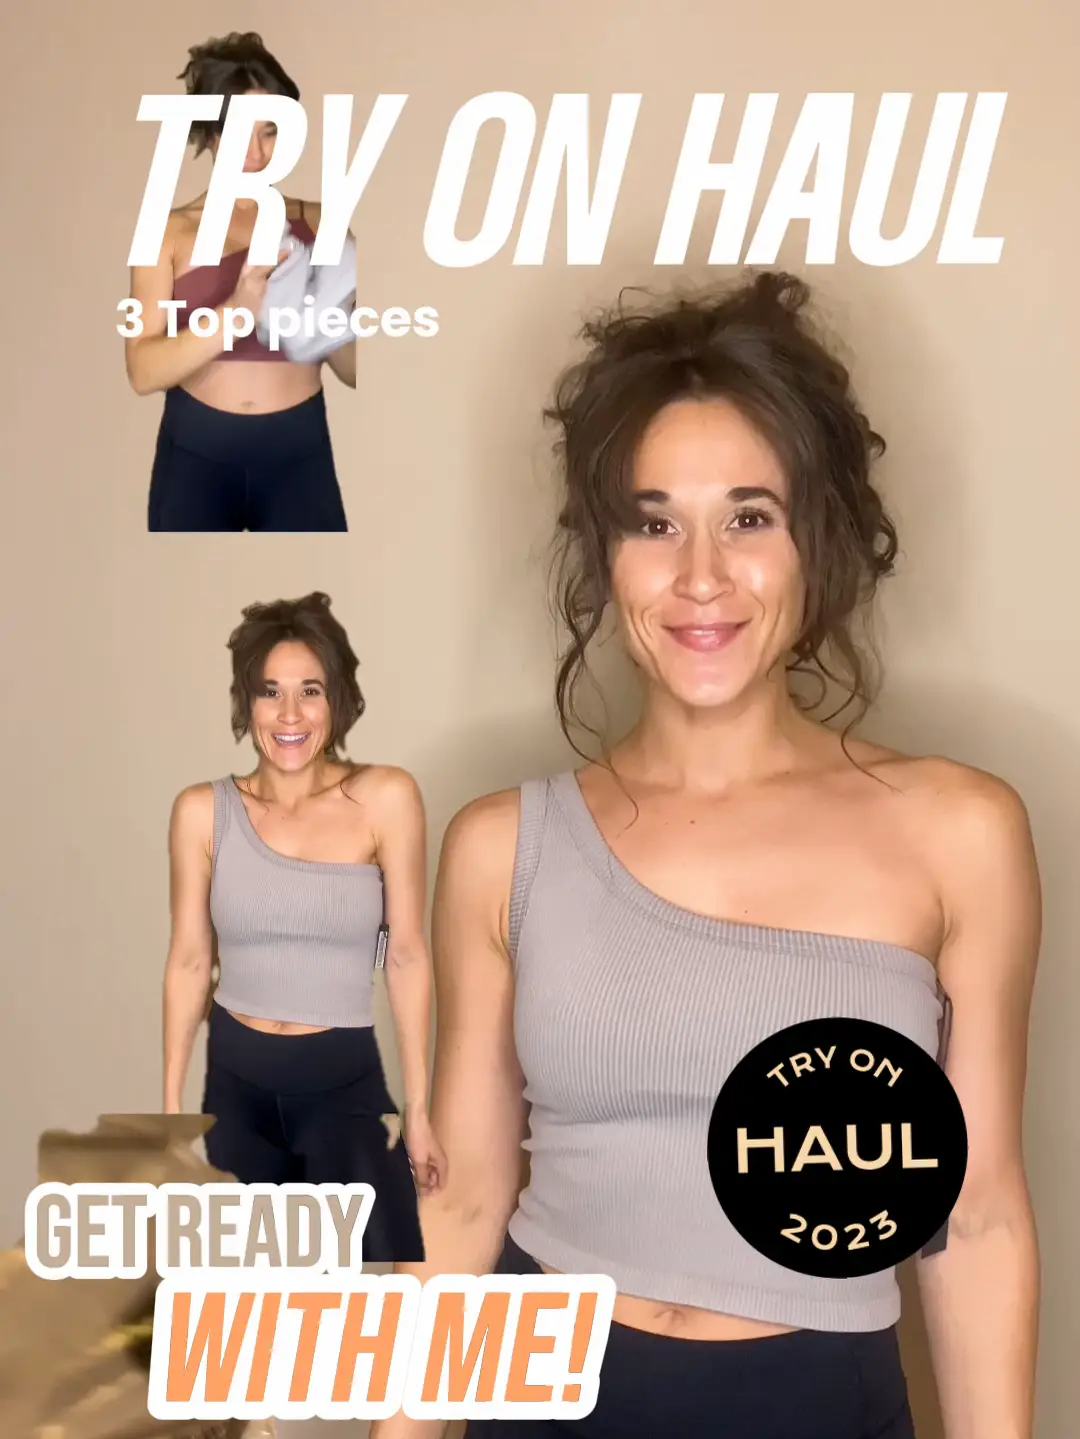 First Shein Haul + Review + Video - Sweet Honey Life